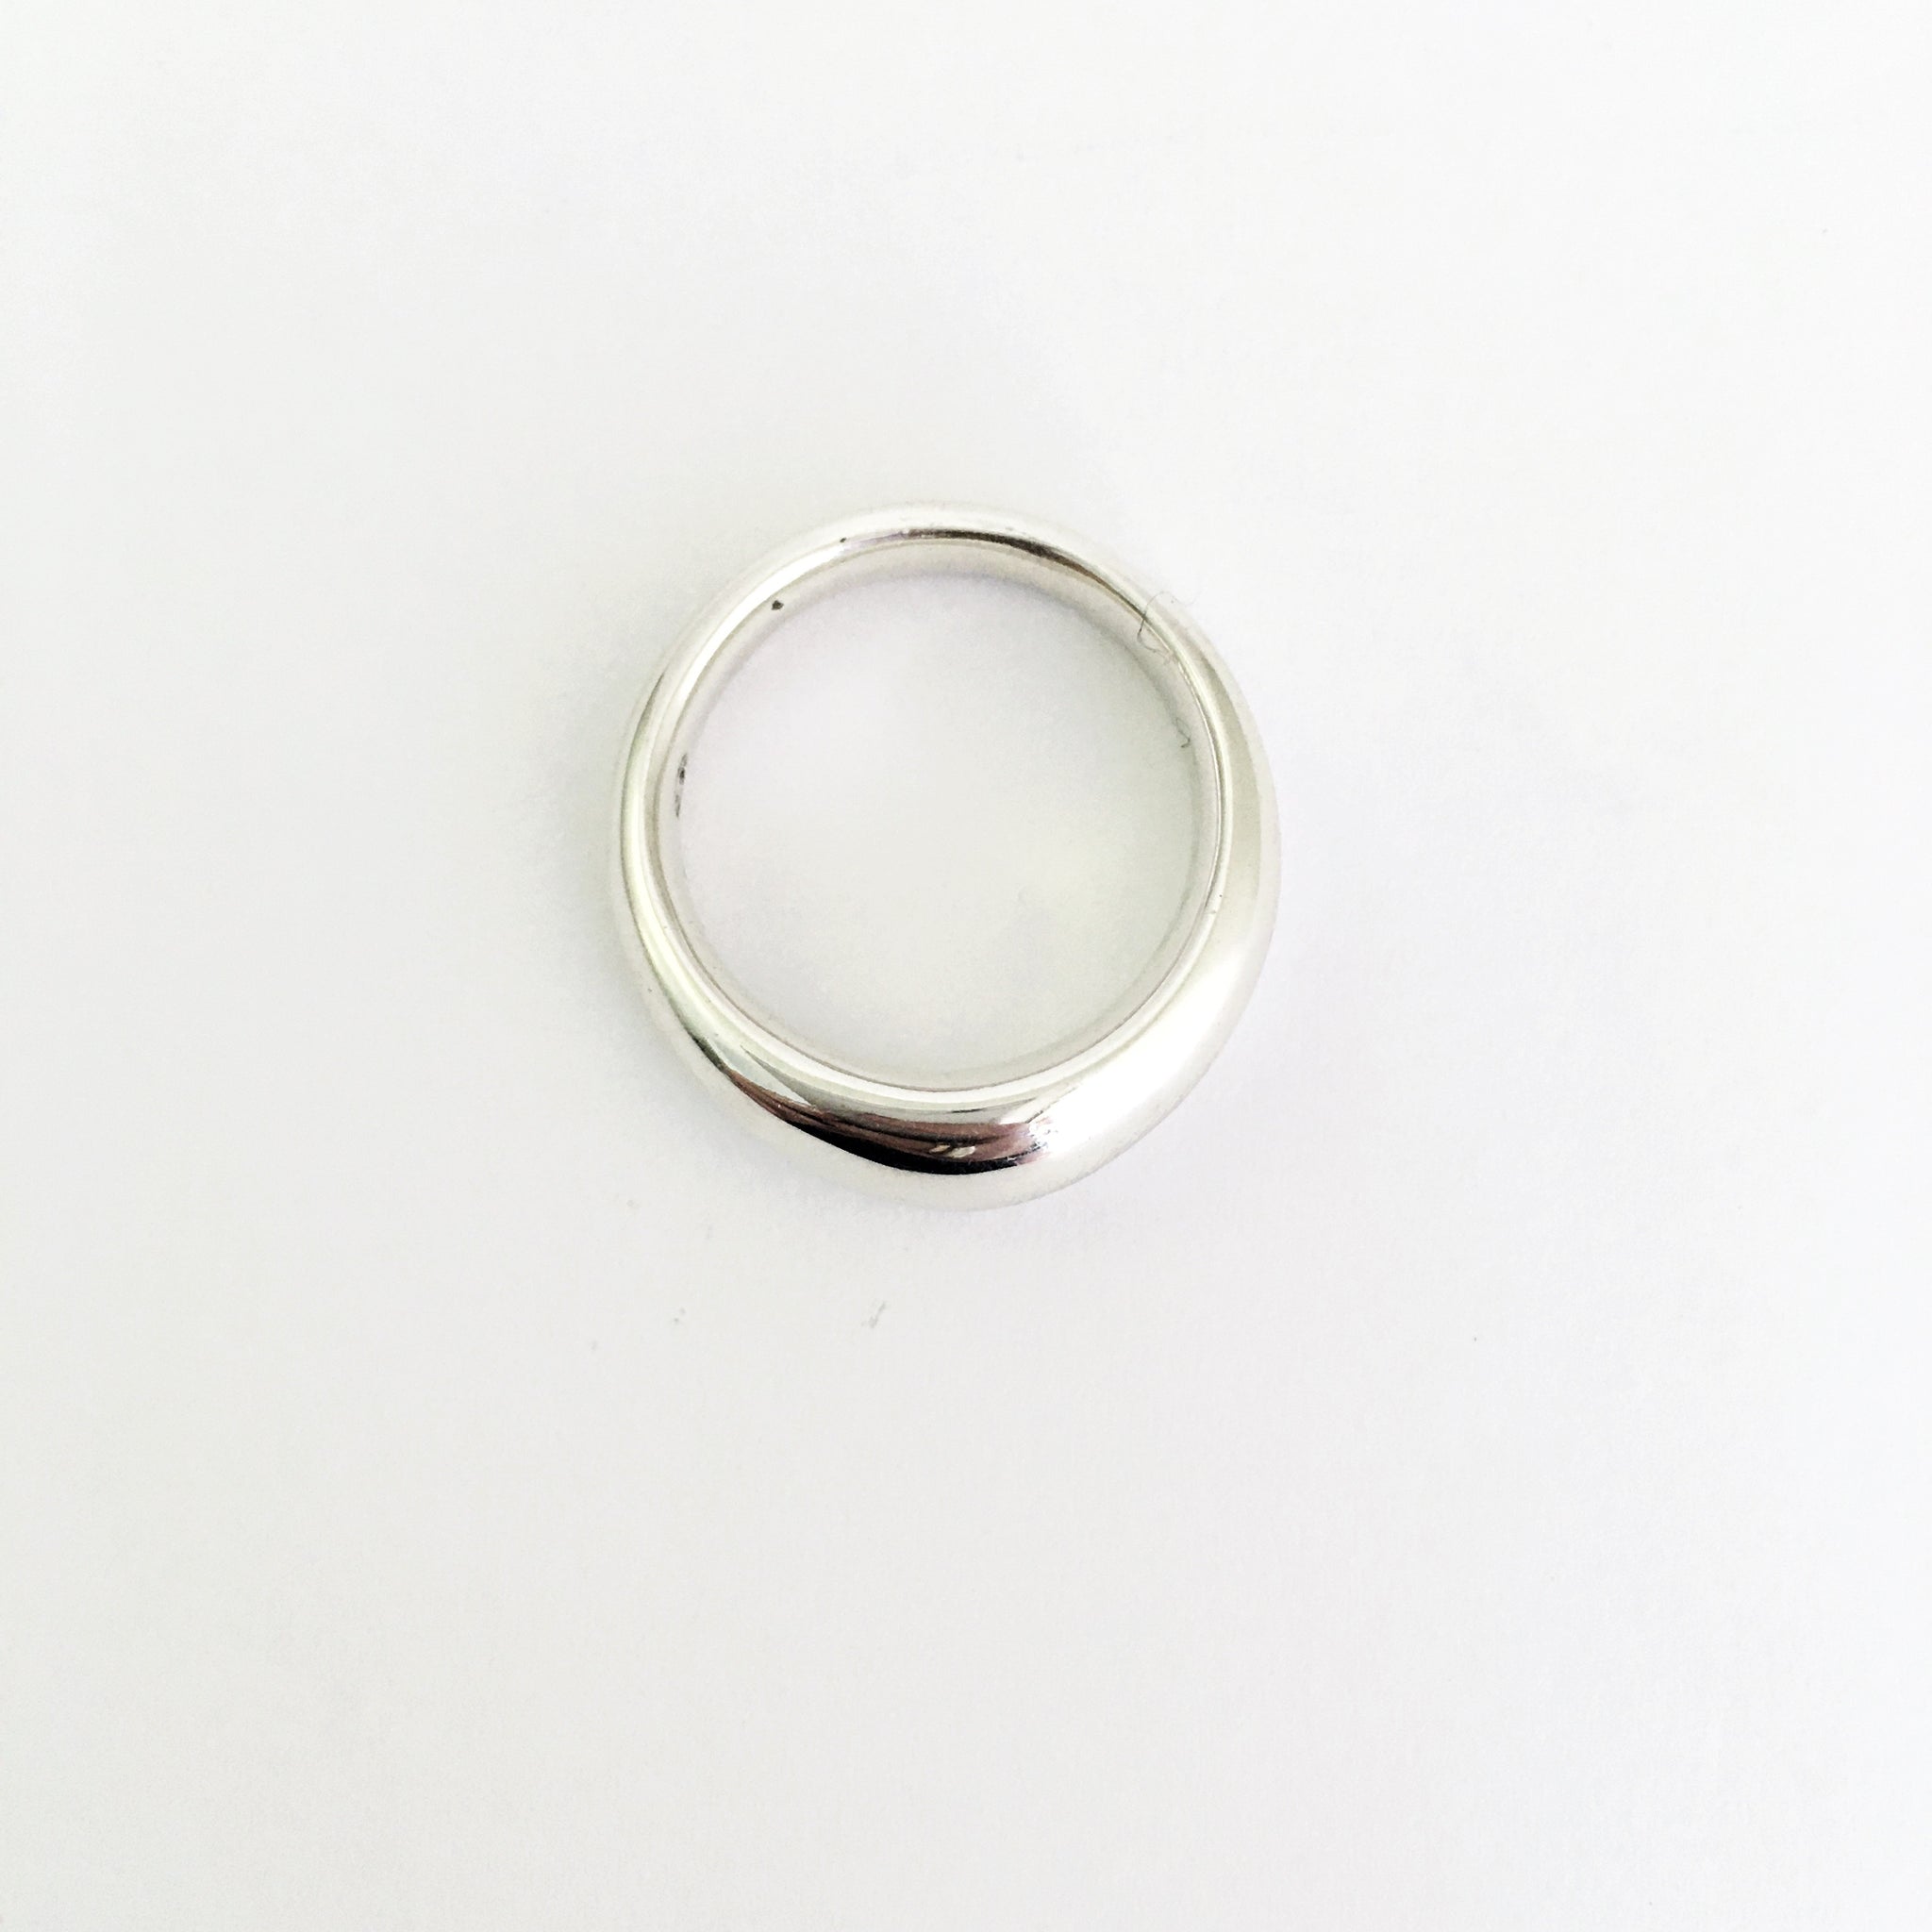 Pebble ring in sterling silver by Savage Jewellery